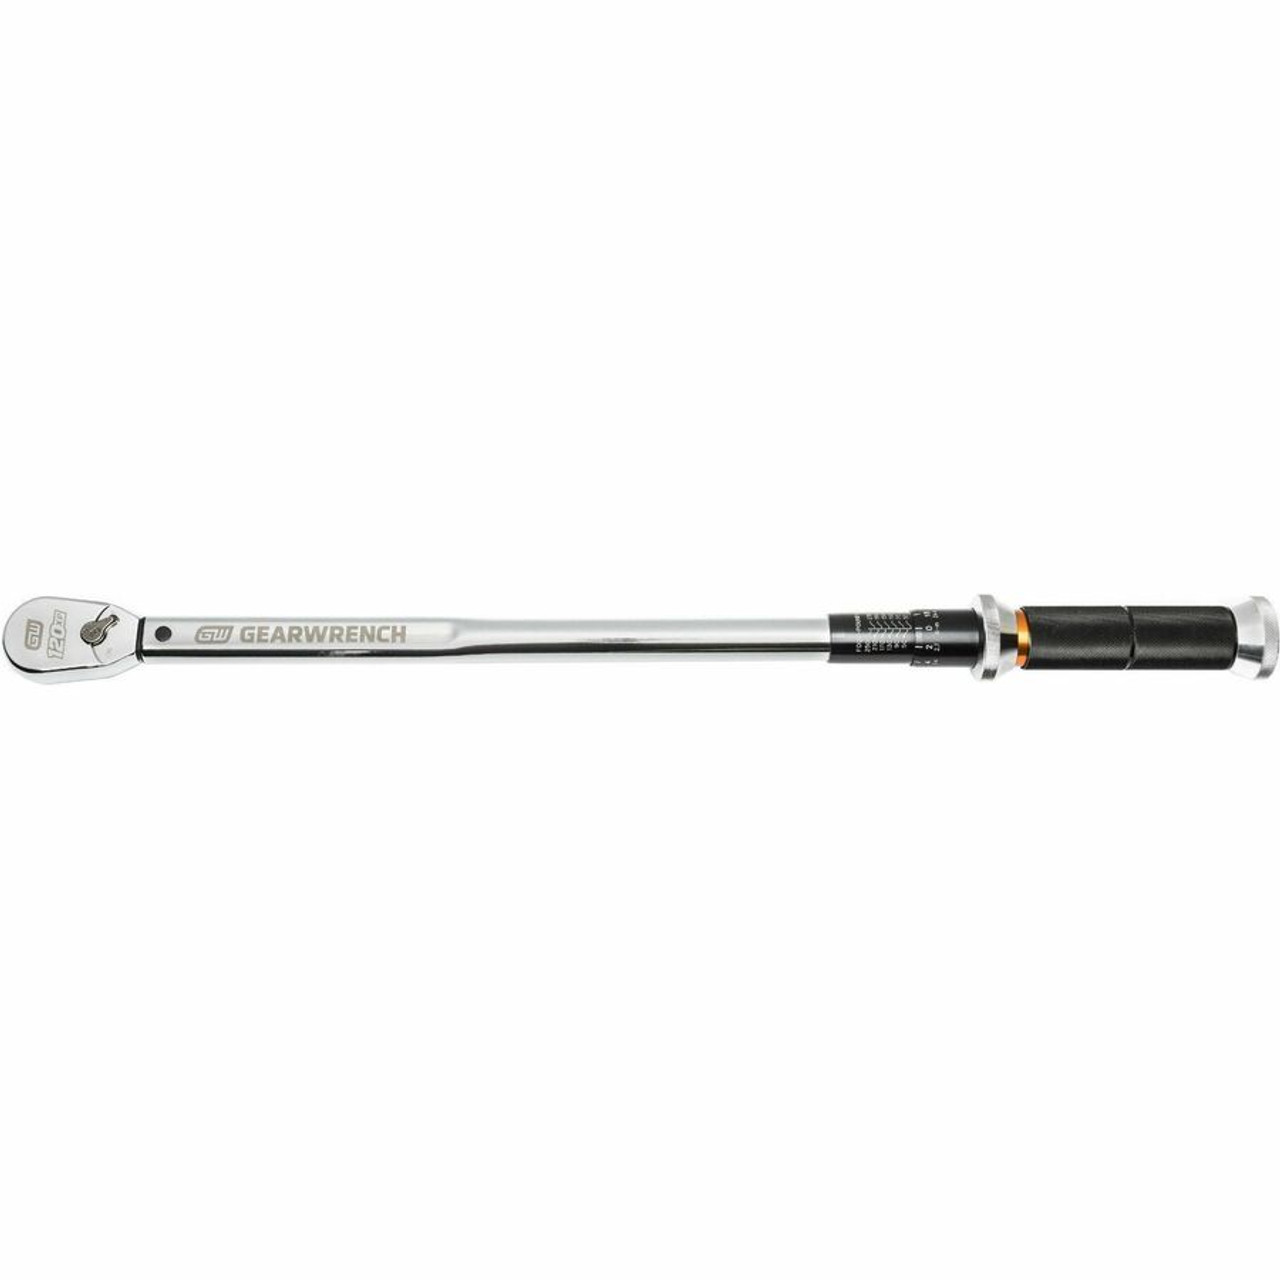 Gearwrench 3/4-Inch Electronic Torque Wrench Review